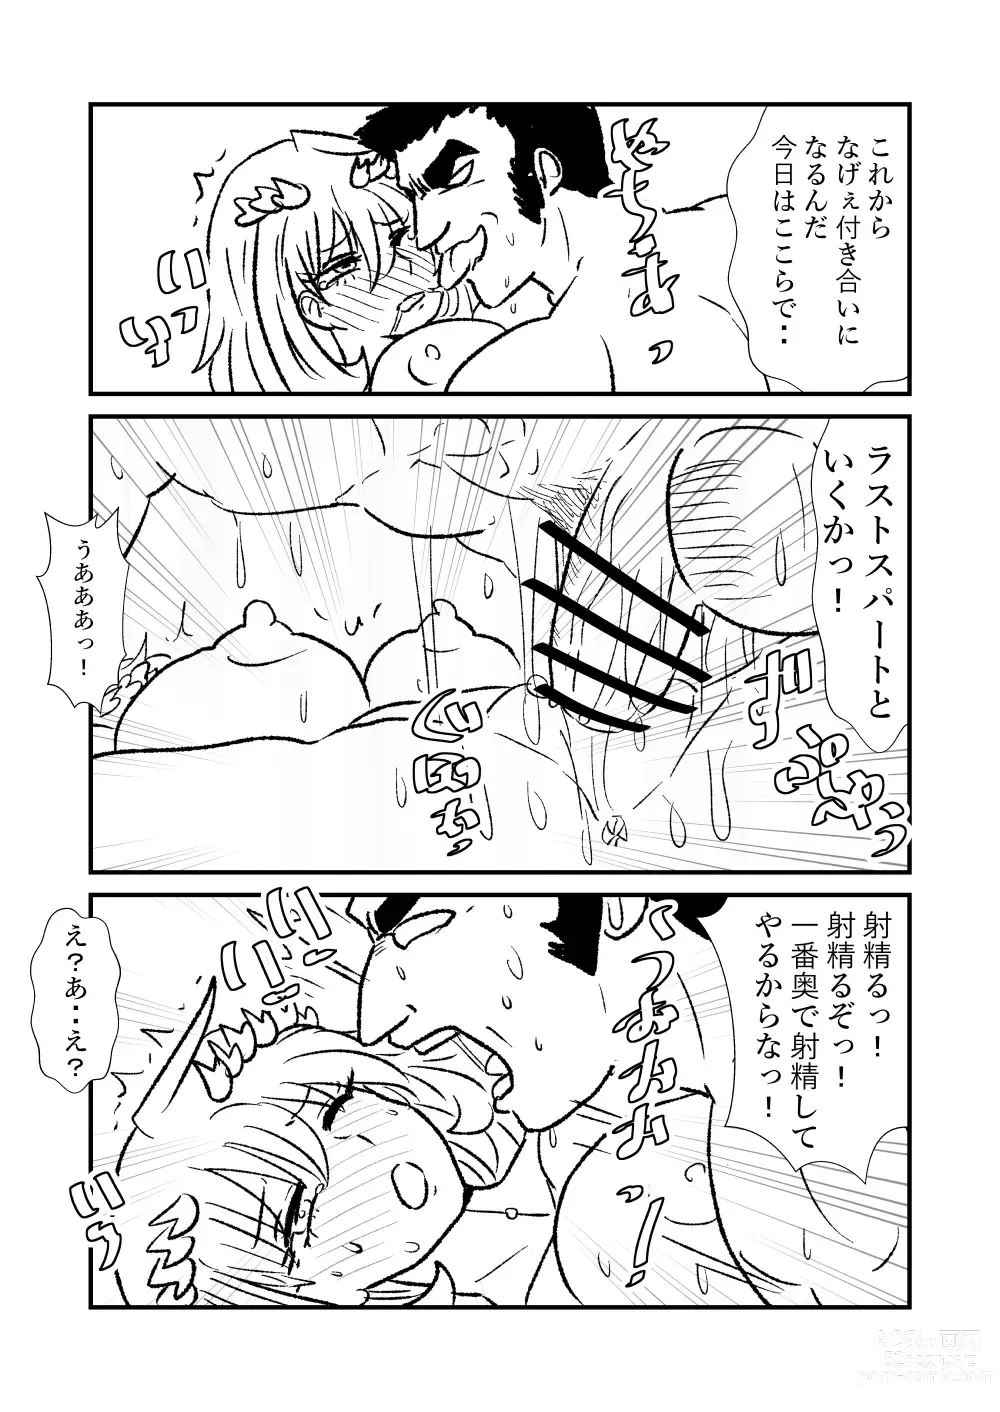 Page 20 of doujinshi Hime Kendo Cage